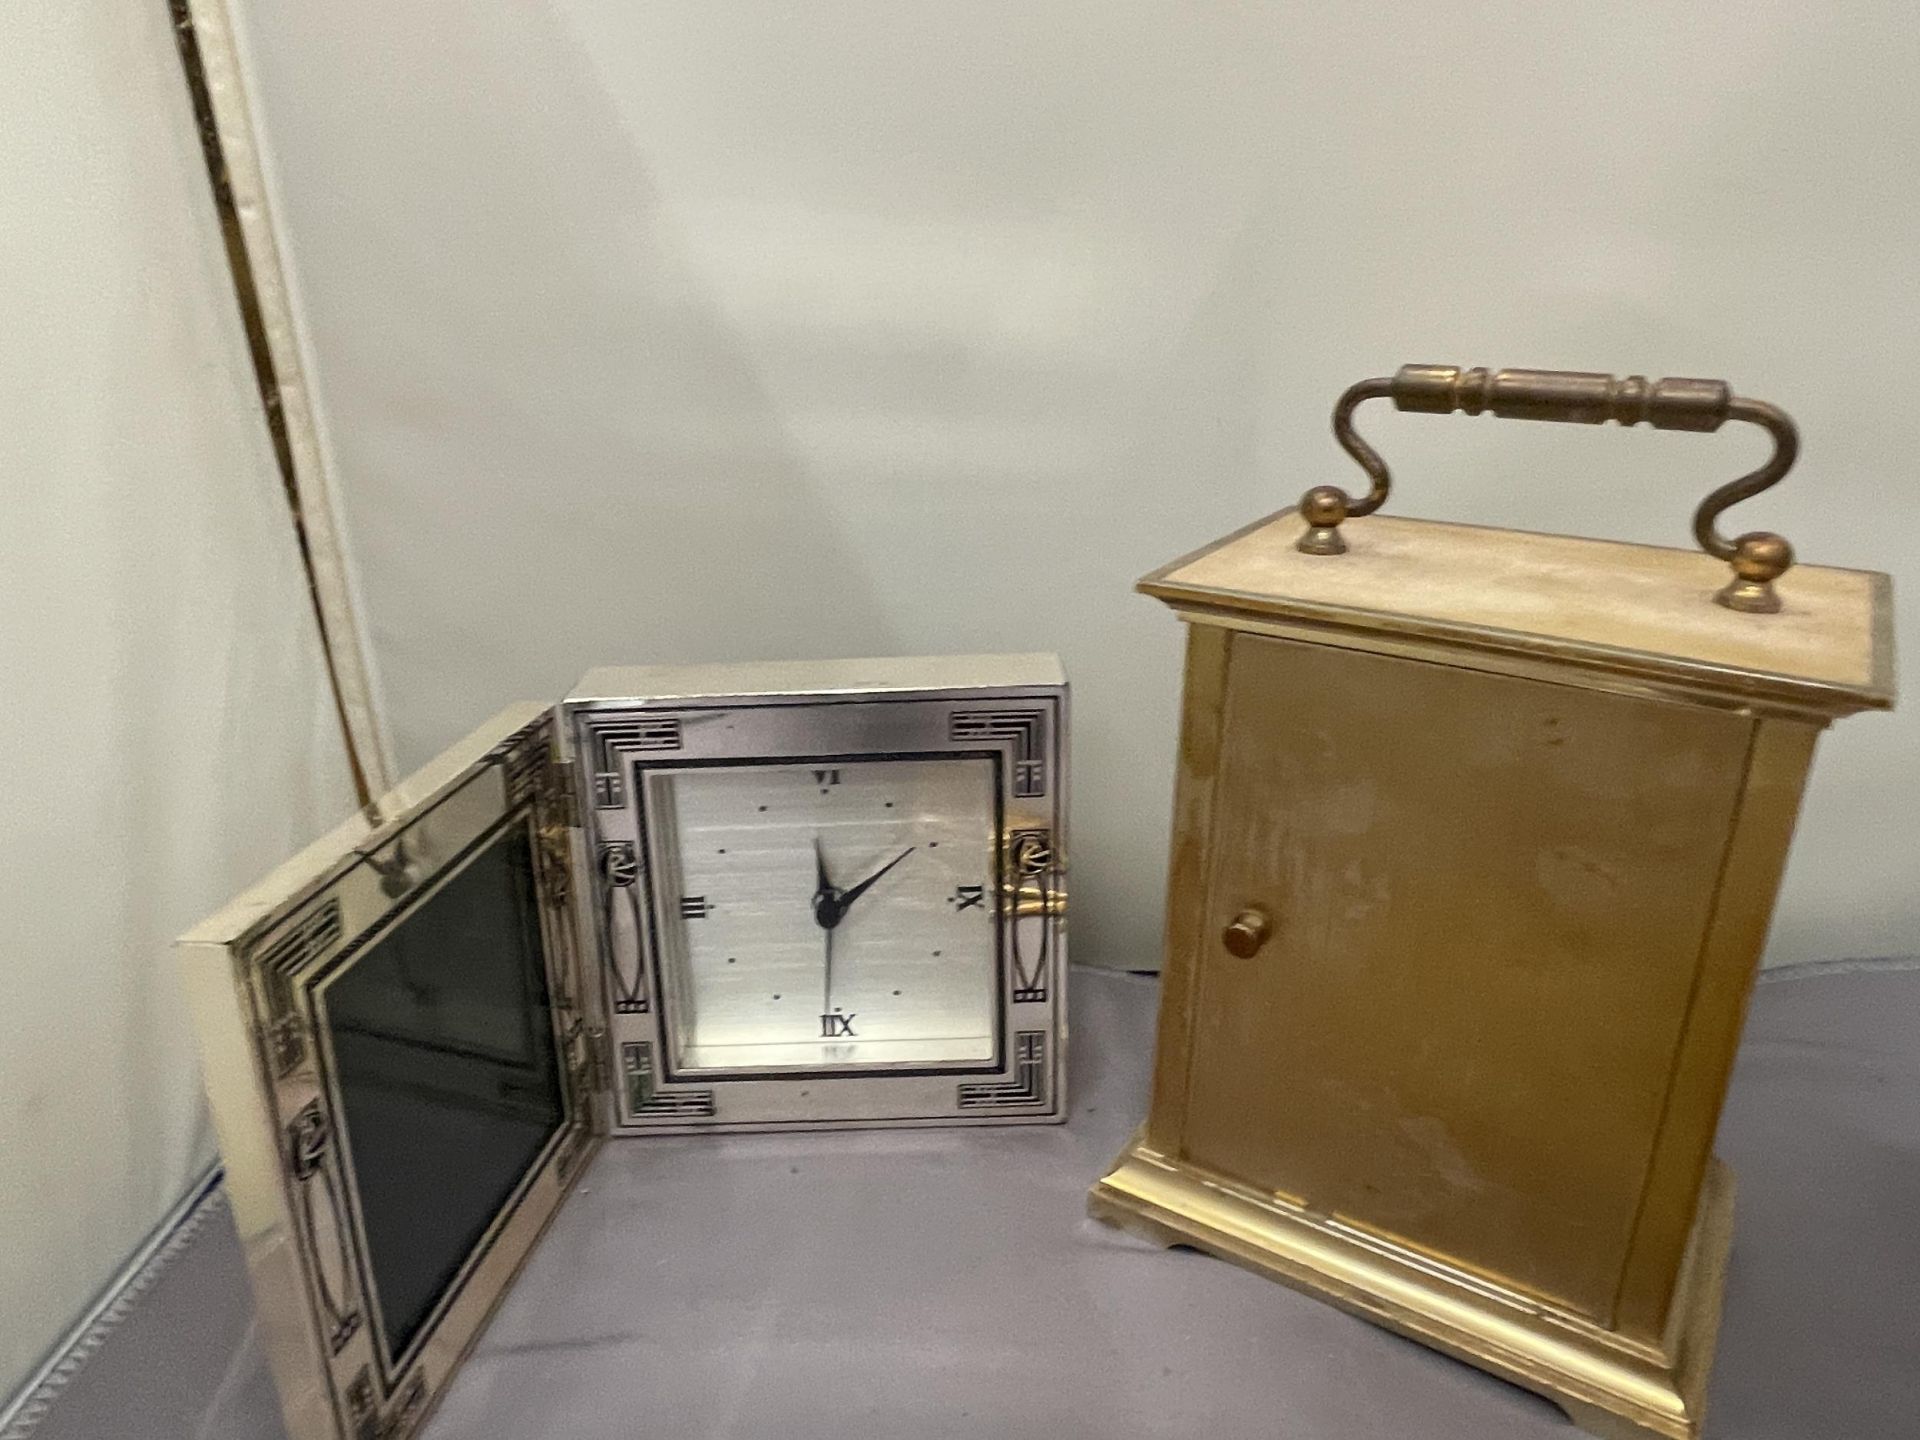 TWO CARRIAGE CLOCKS ONE WITH VISUAL ESCAPEMENT, A FURTHER MACINTOSCH STYLE CLOCK AND THREE POCKET - Image 4 of 5